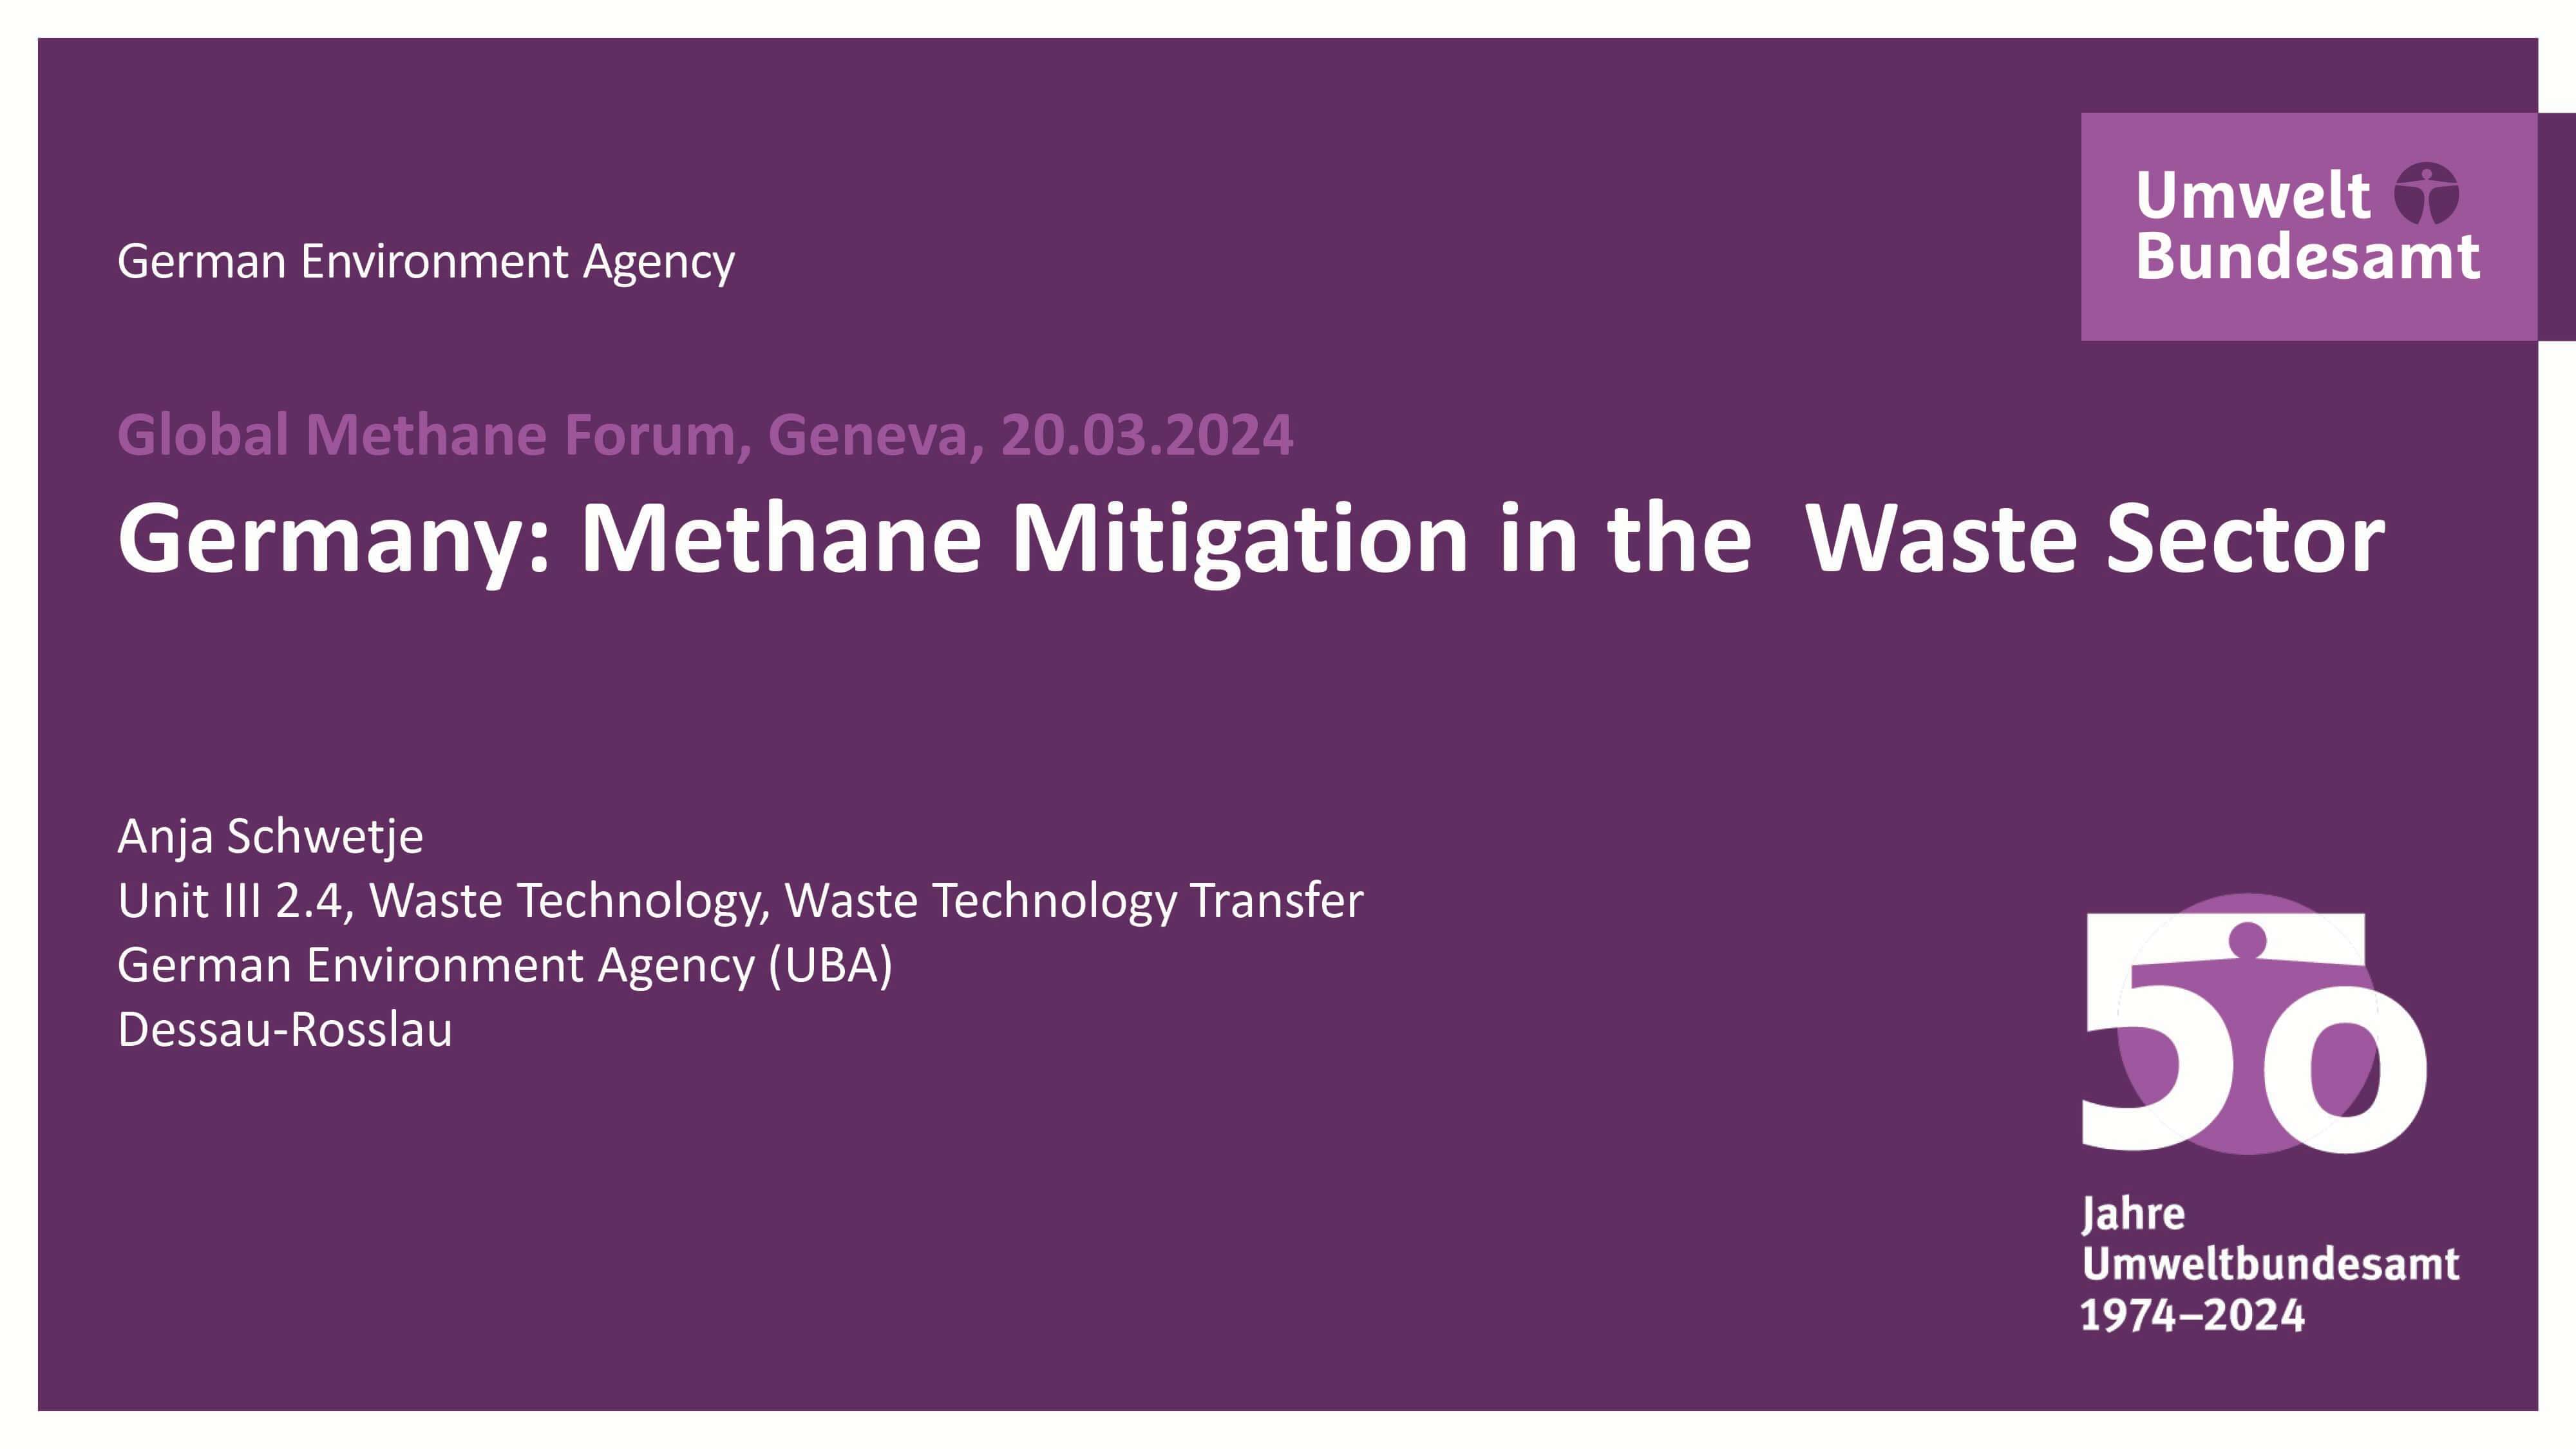 Germany: Methane Mitigation in the Waste Sector